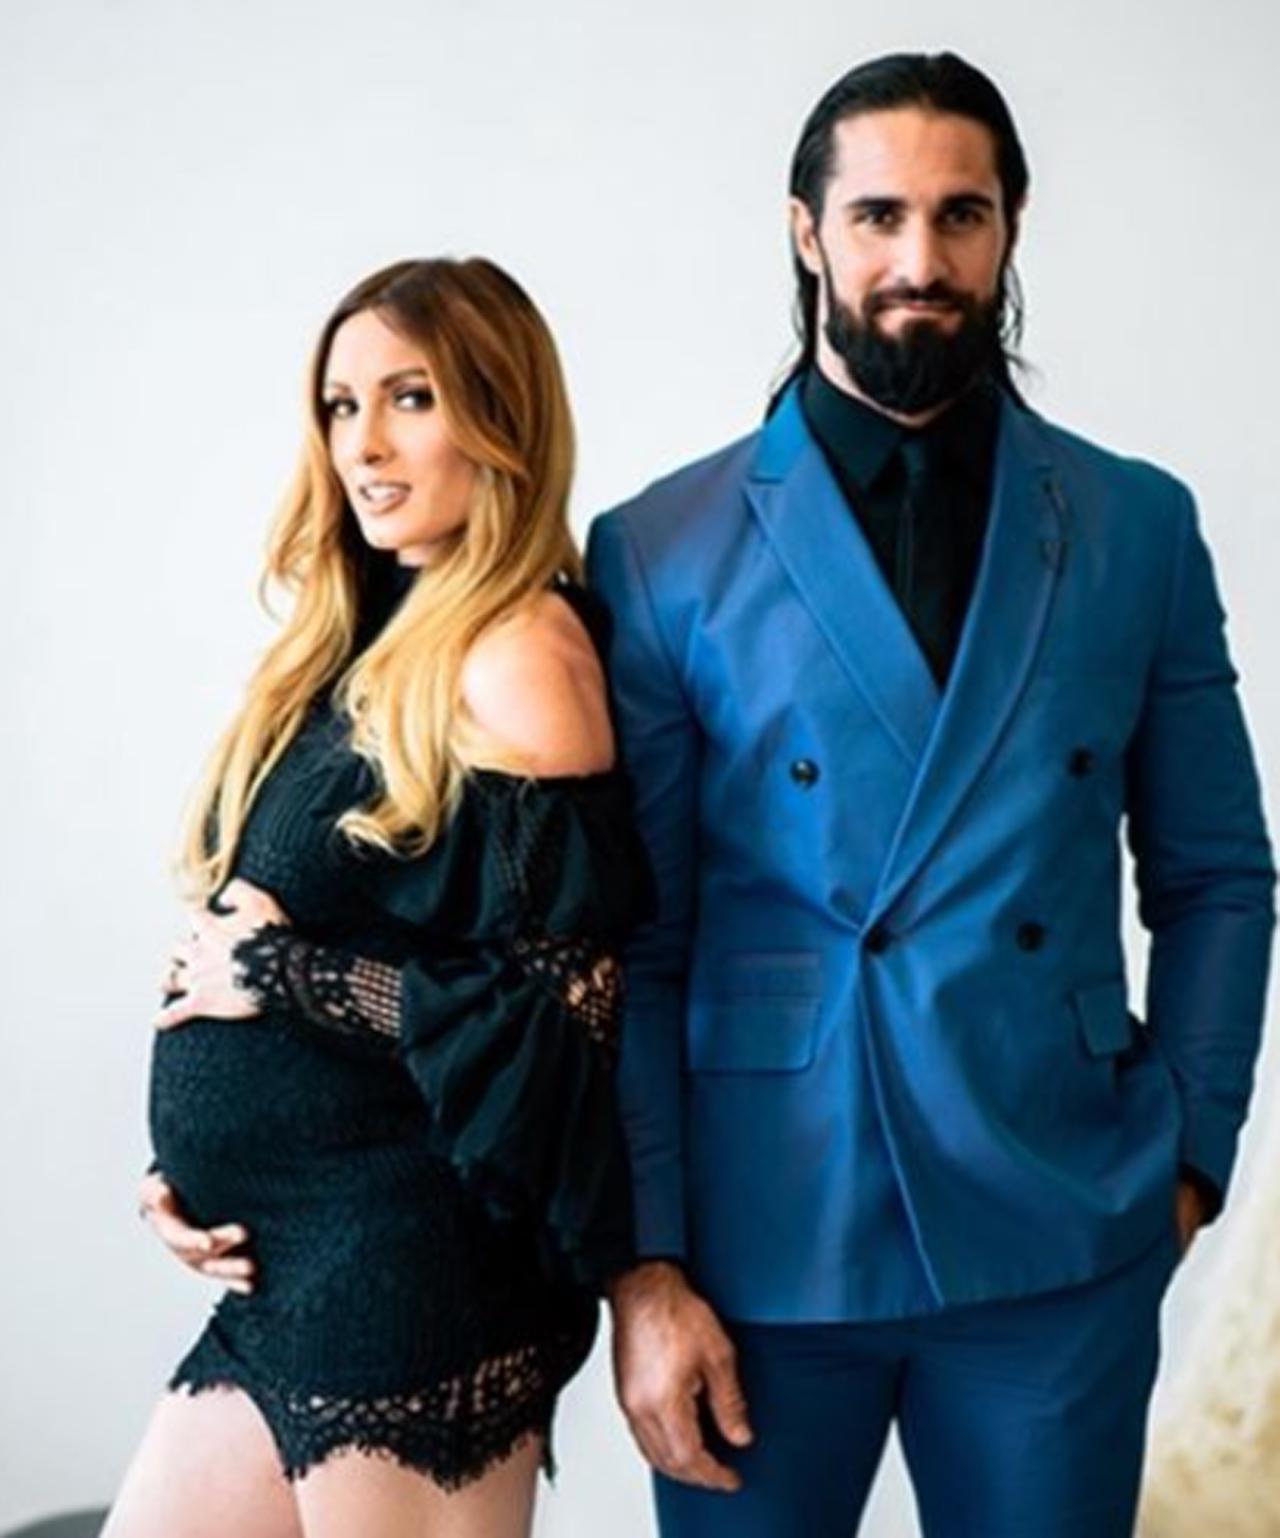 Seth Rollins and Becky Lynch got married on June 29, 2021